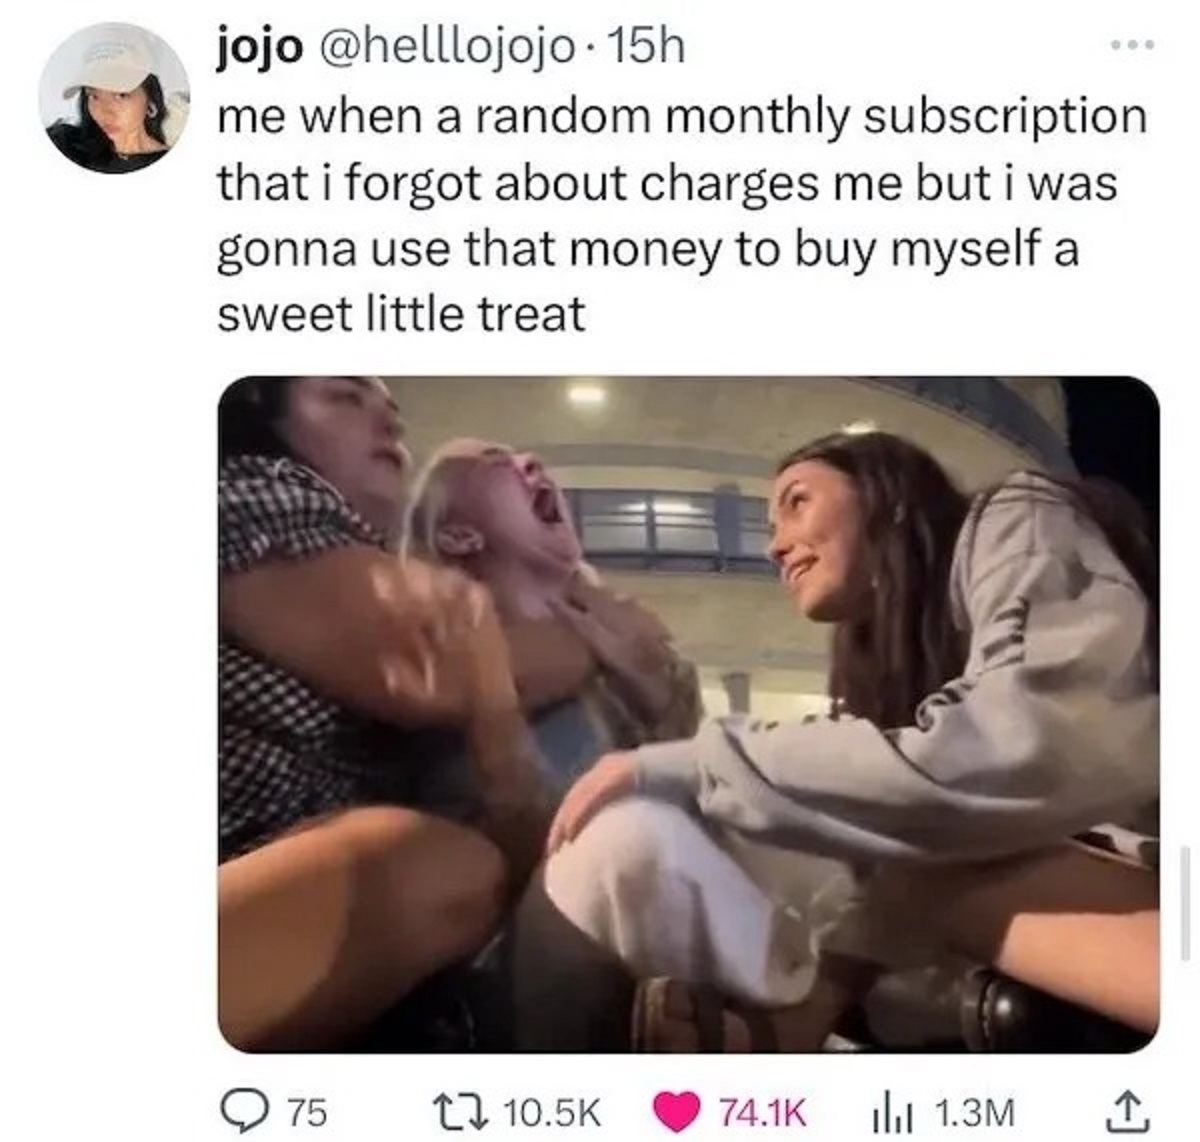 photo caption - jojo .15h me when a random monthly subscription. that i forgot about charges me but i was gonna use that money to buy myself a sweet little treat 75 t Ill 1.3M